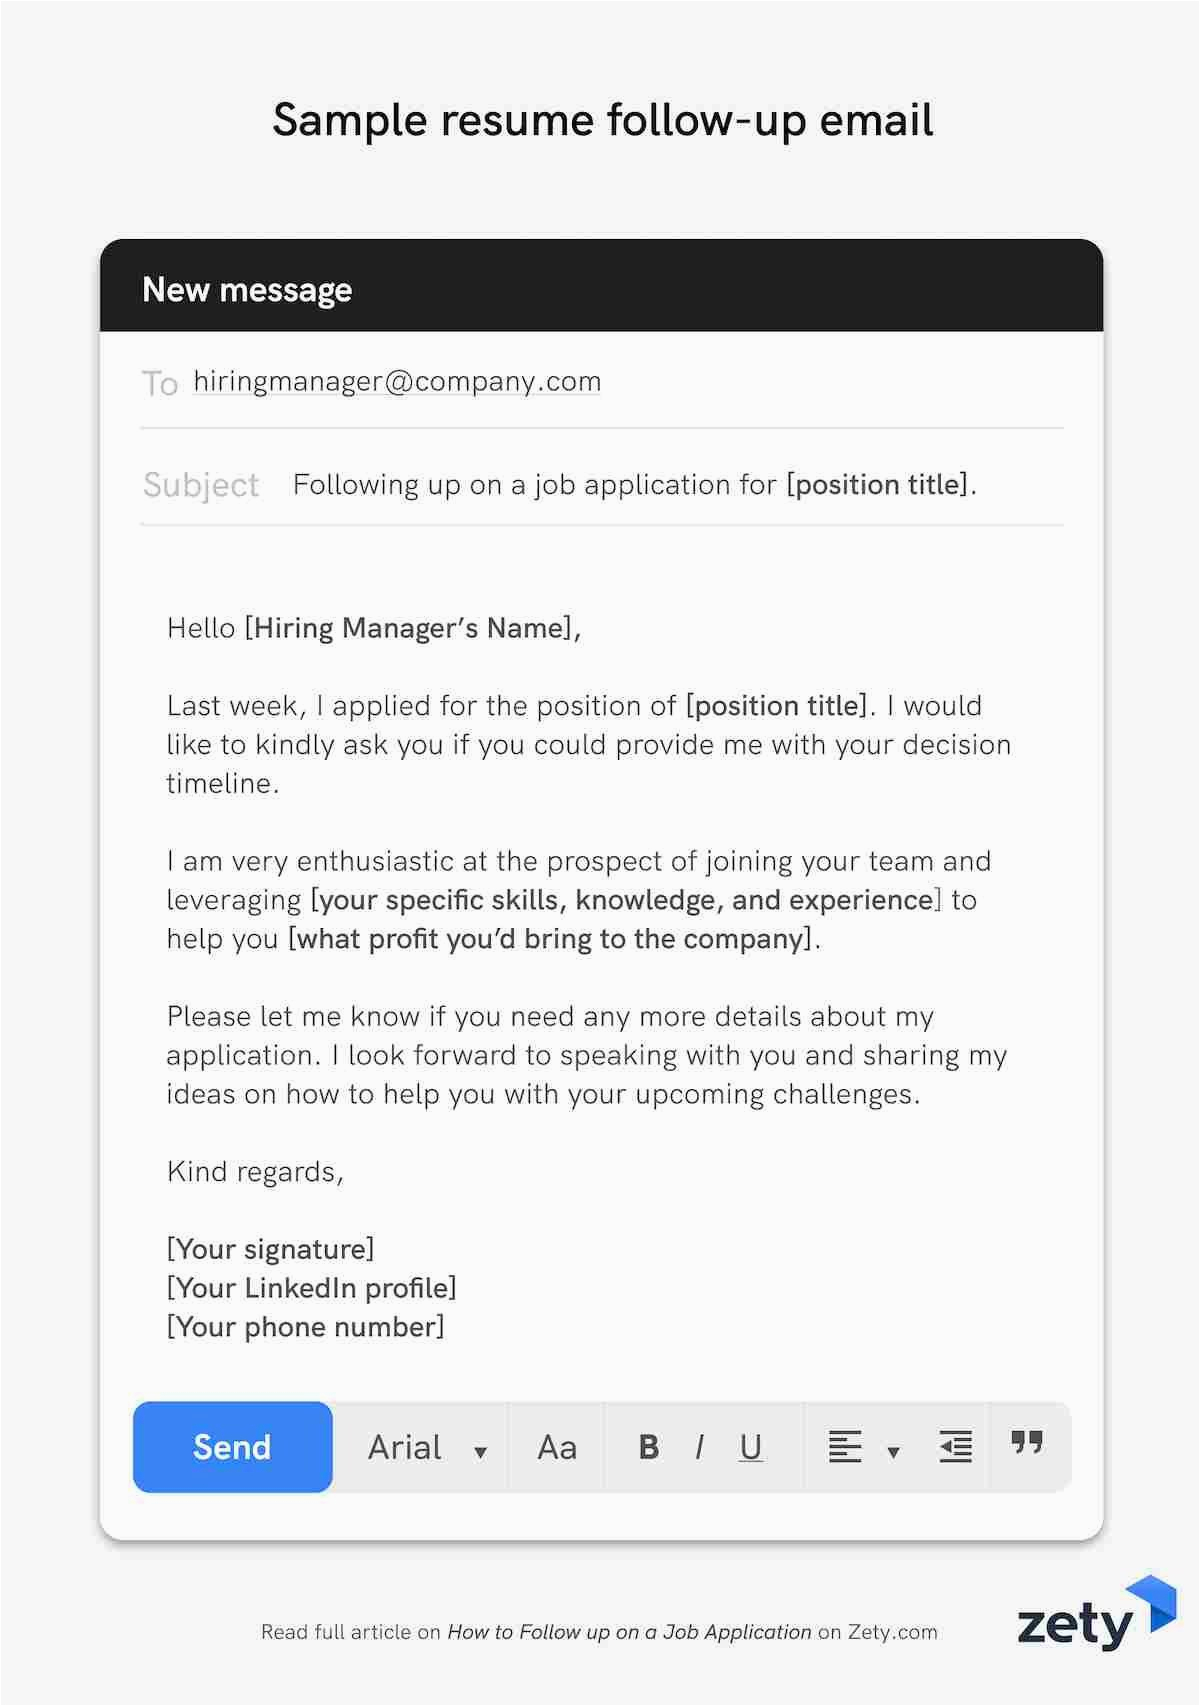 Sample Email Response to Resume Request How to Follow Up On A Job Application with Email Sample